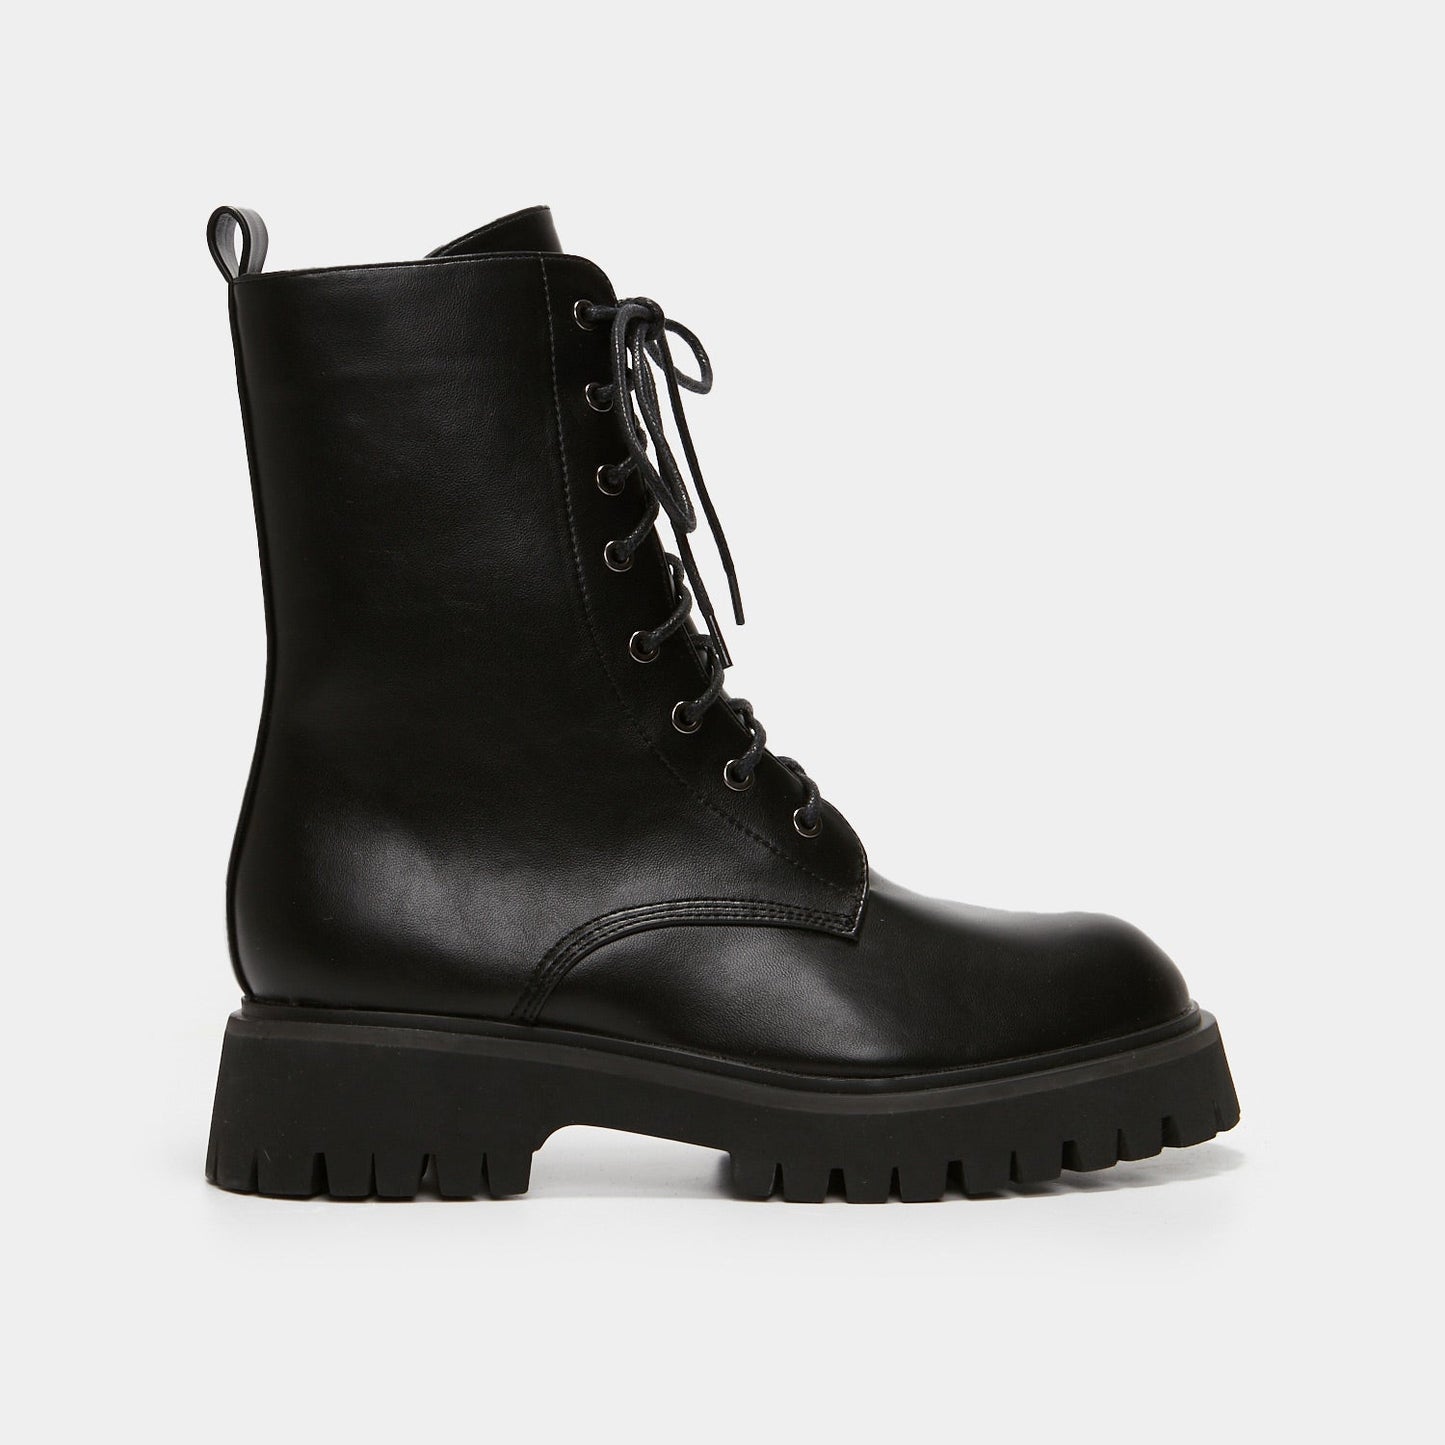 Anchor Black Military Lace Up Boots - Ankle Boots - KOI Footwear - Black - Side View